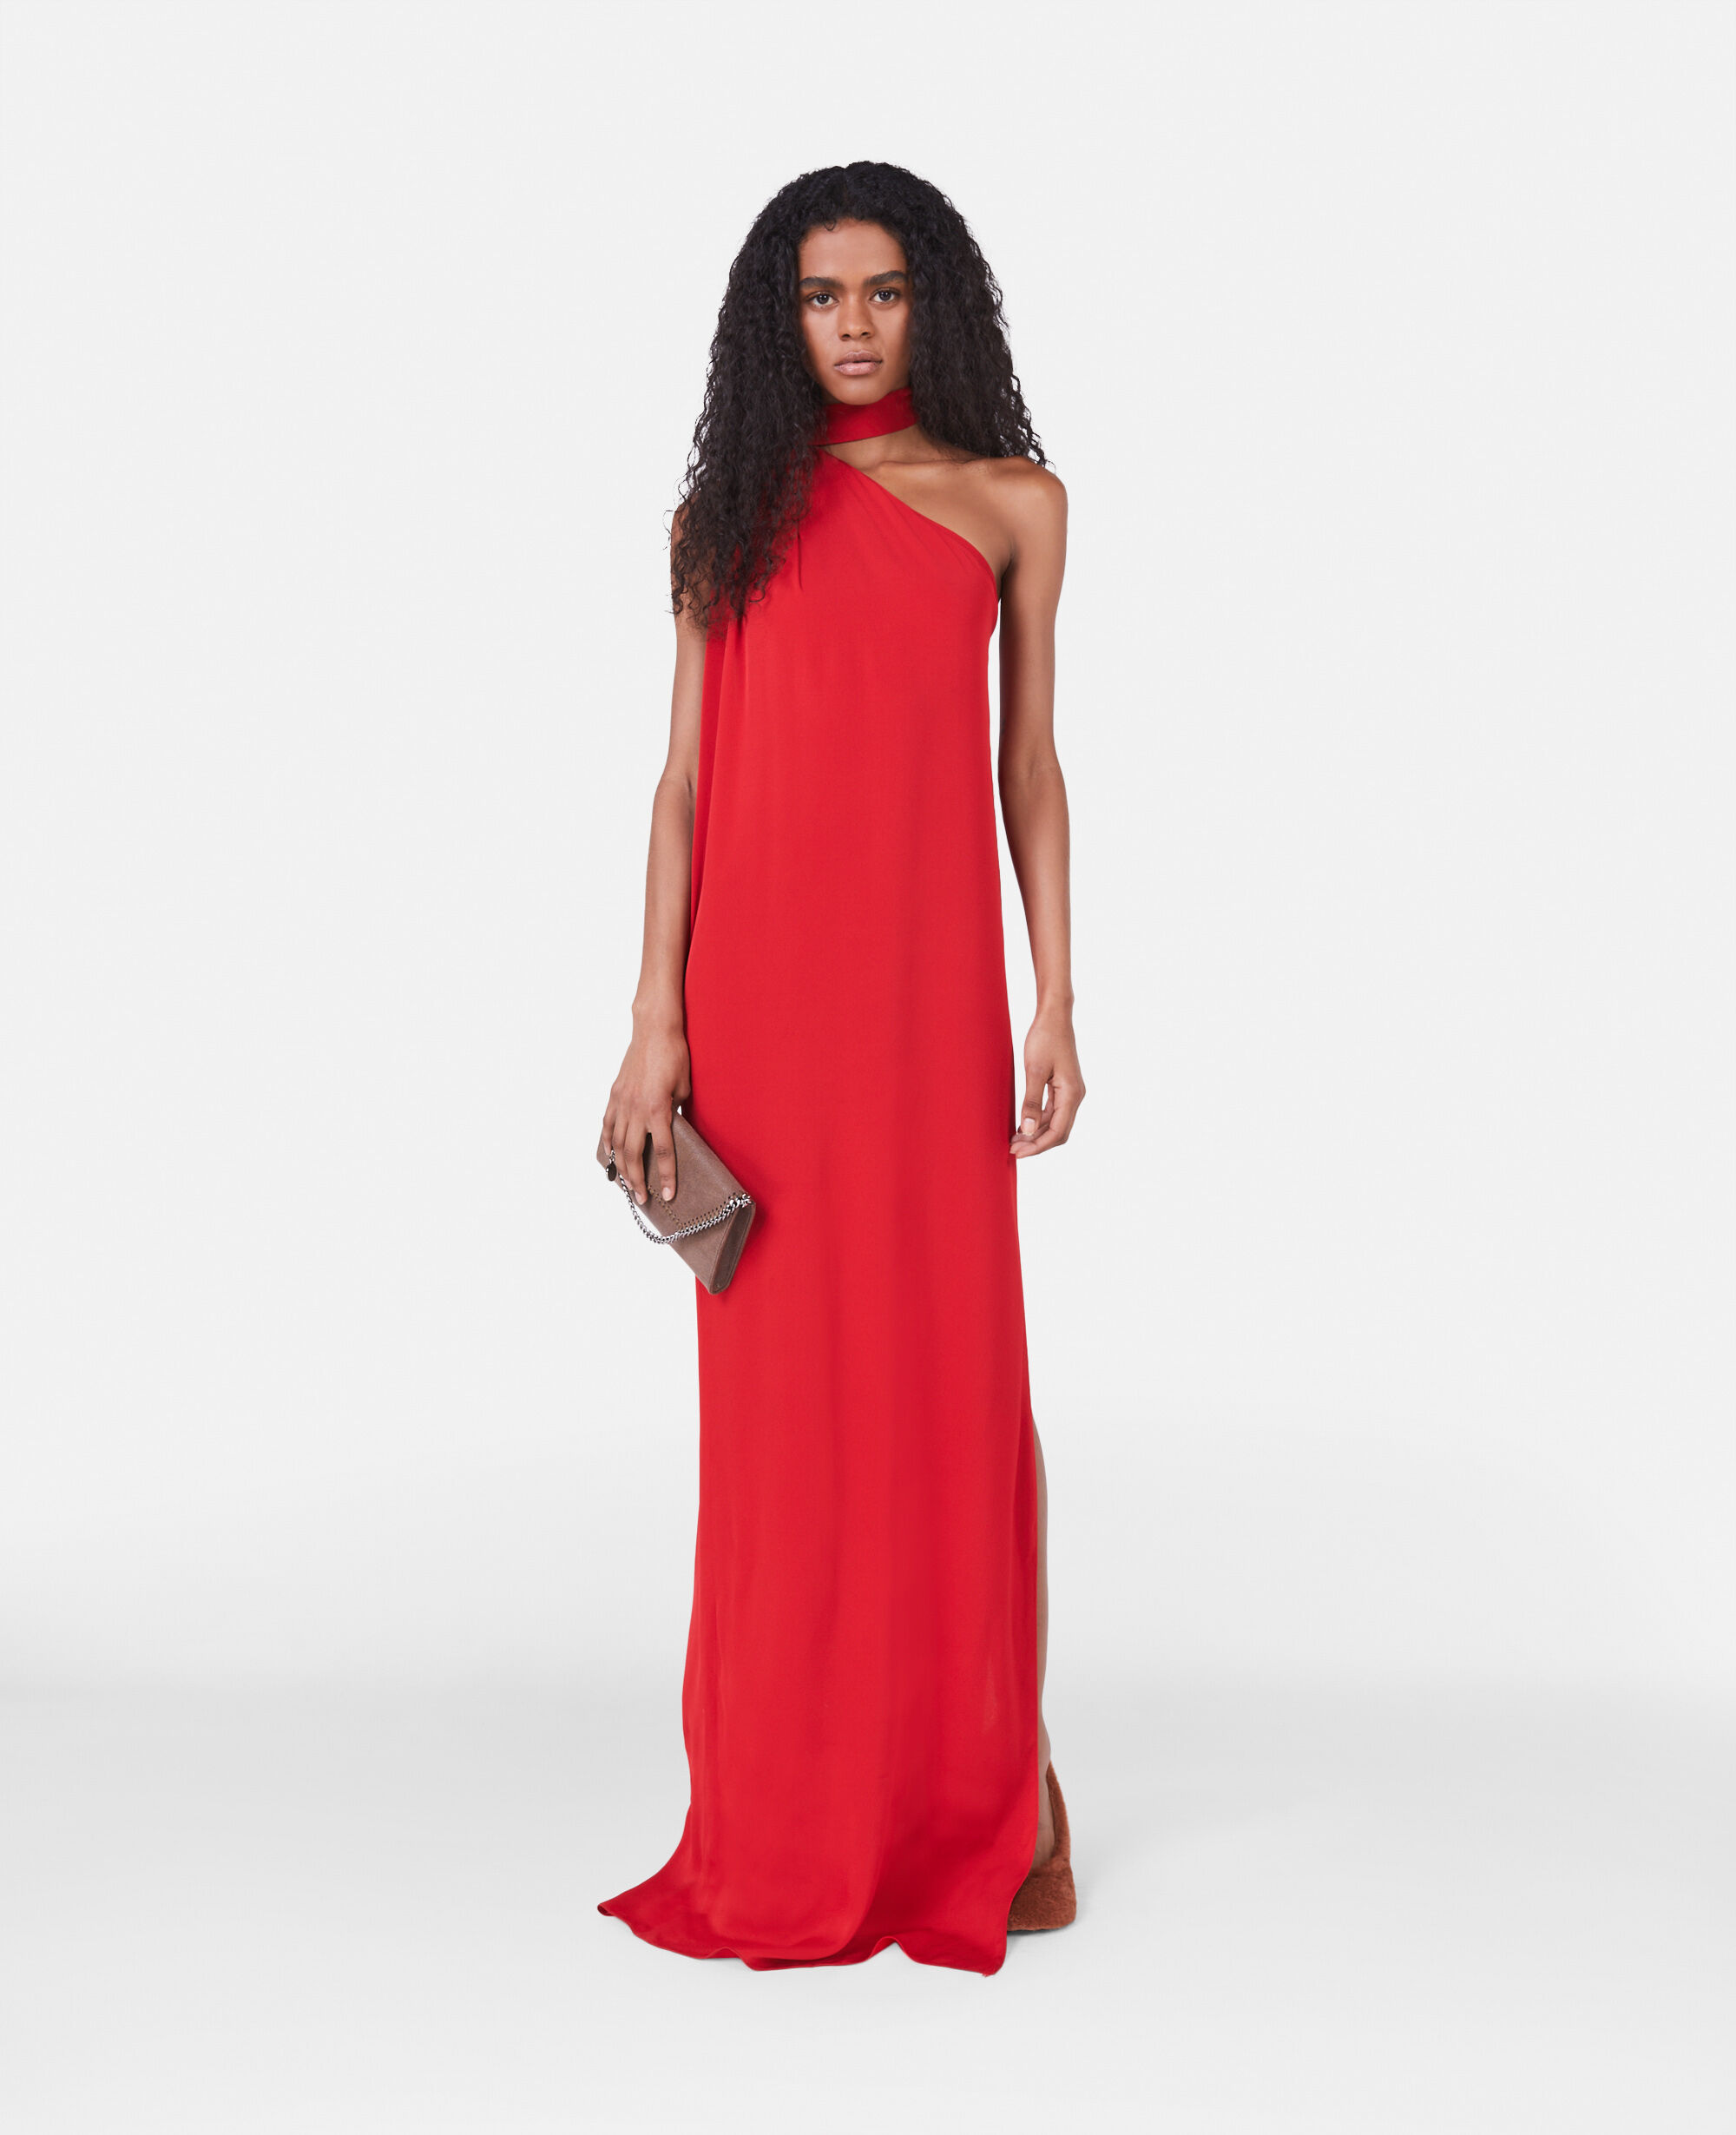 Champagne Cocoon Plunge Gown available only at Shivan and Narresh – SHIVAN  & NARRESH